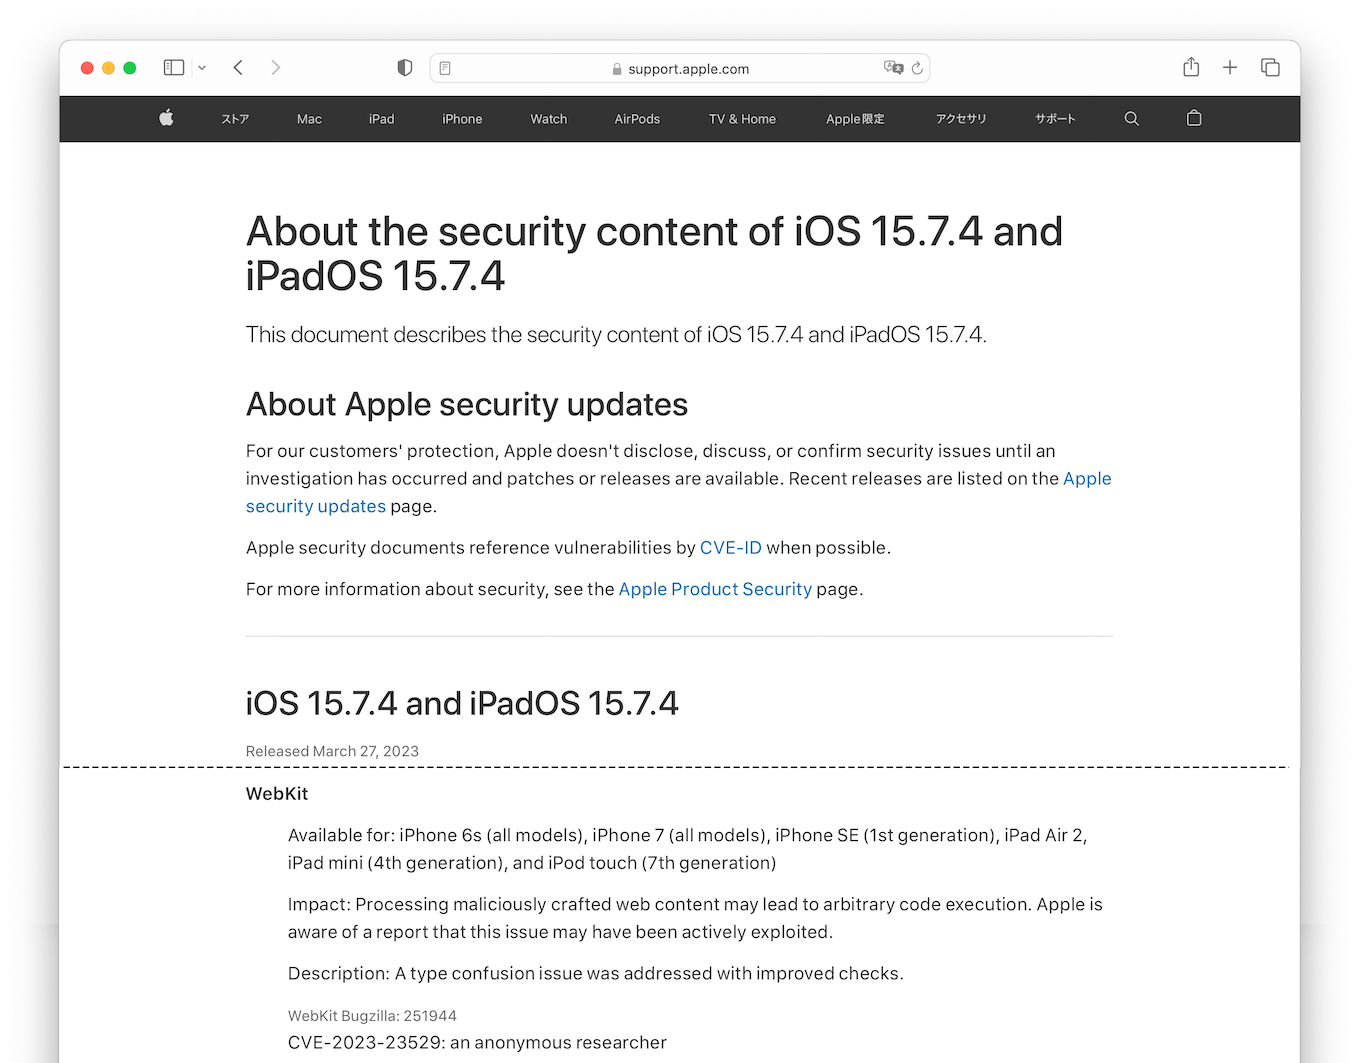 About the security content of iOS 15.7.4 and iPadOS 15.7.4